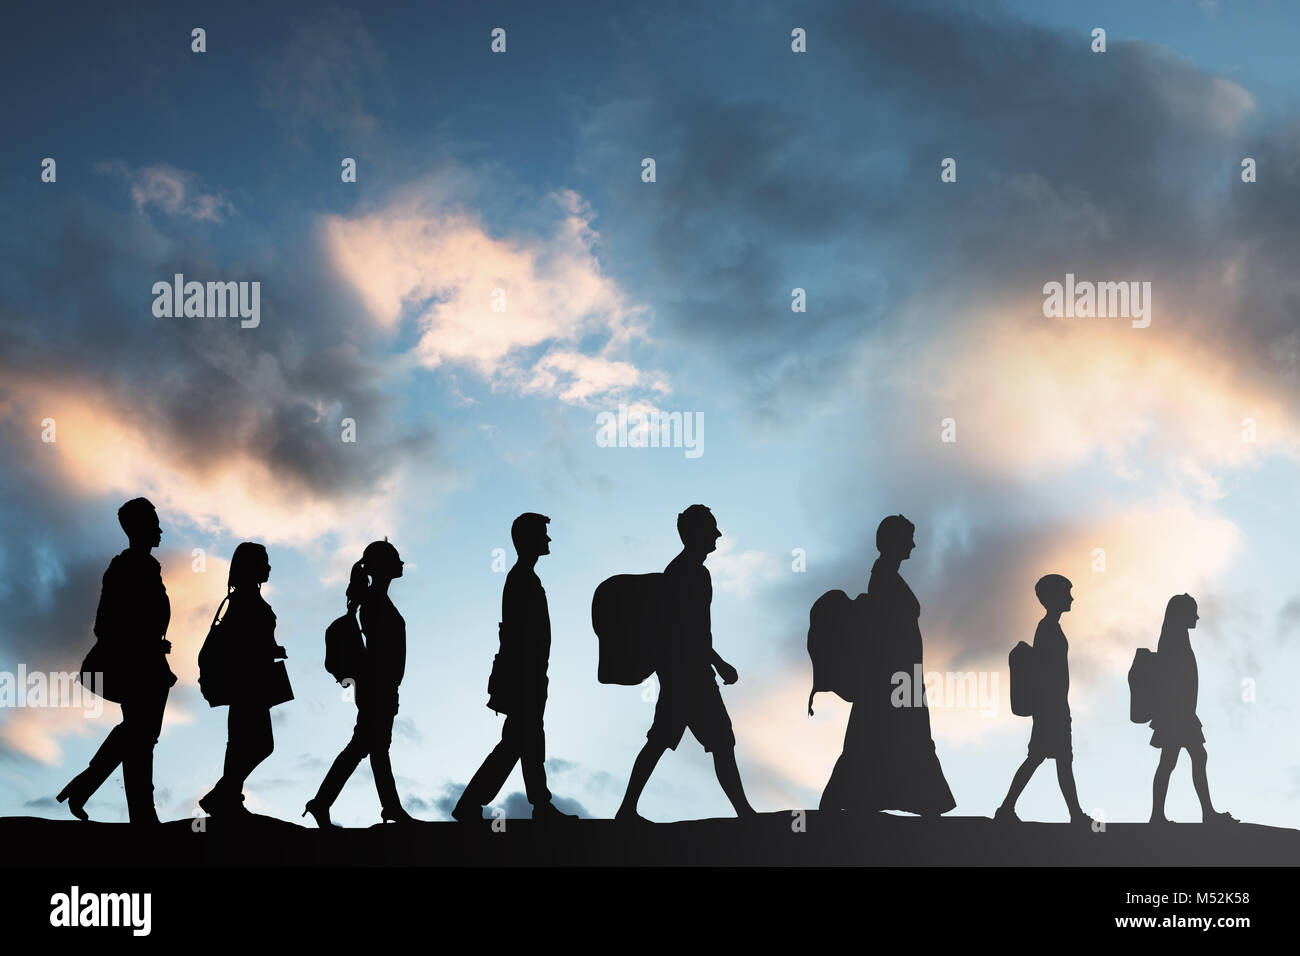 Silhouette Of Refugees People With Luggage Walking In A Row Stock Photo